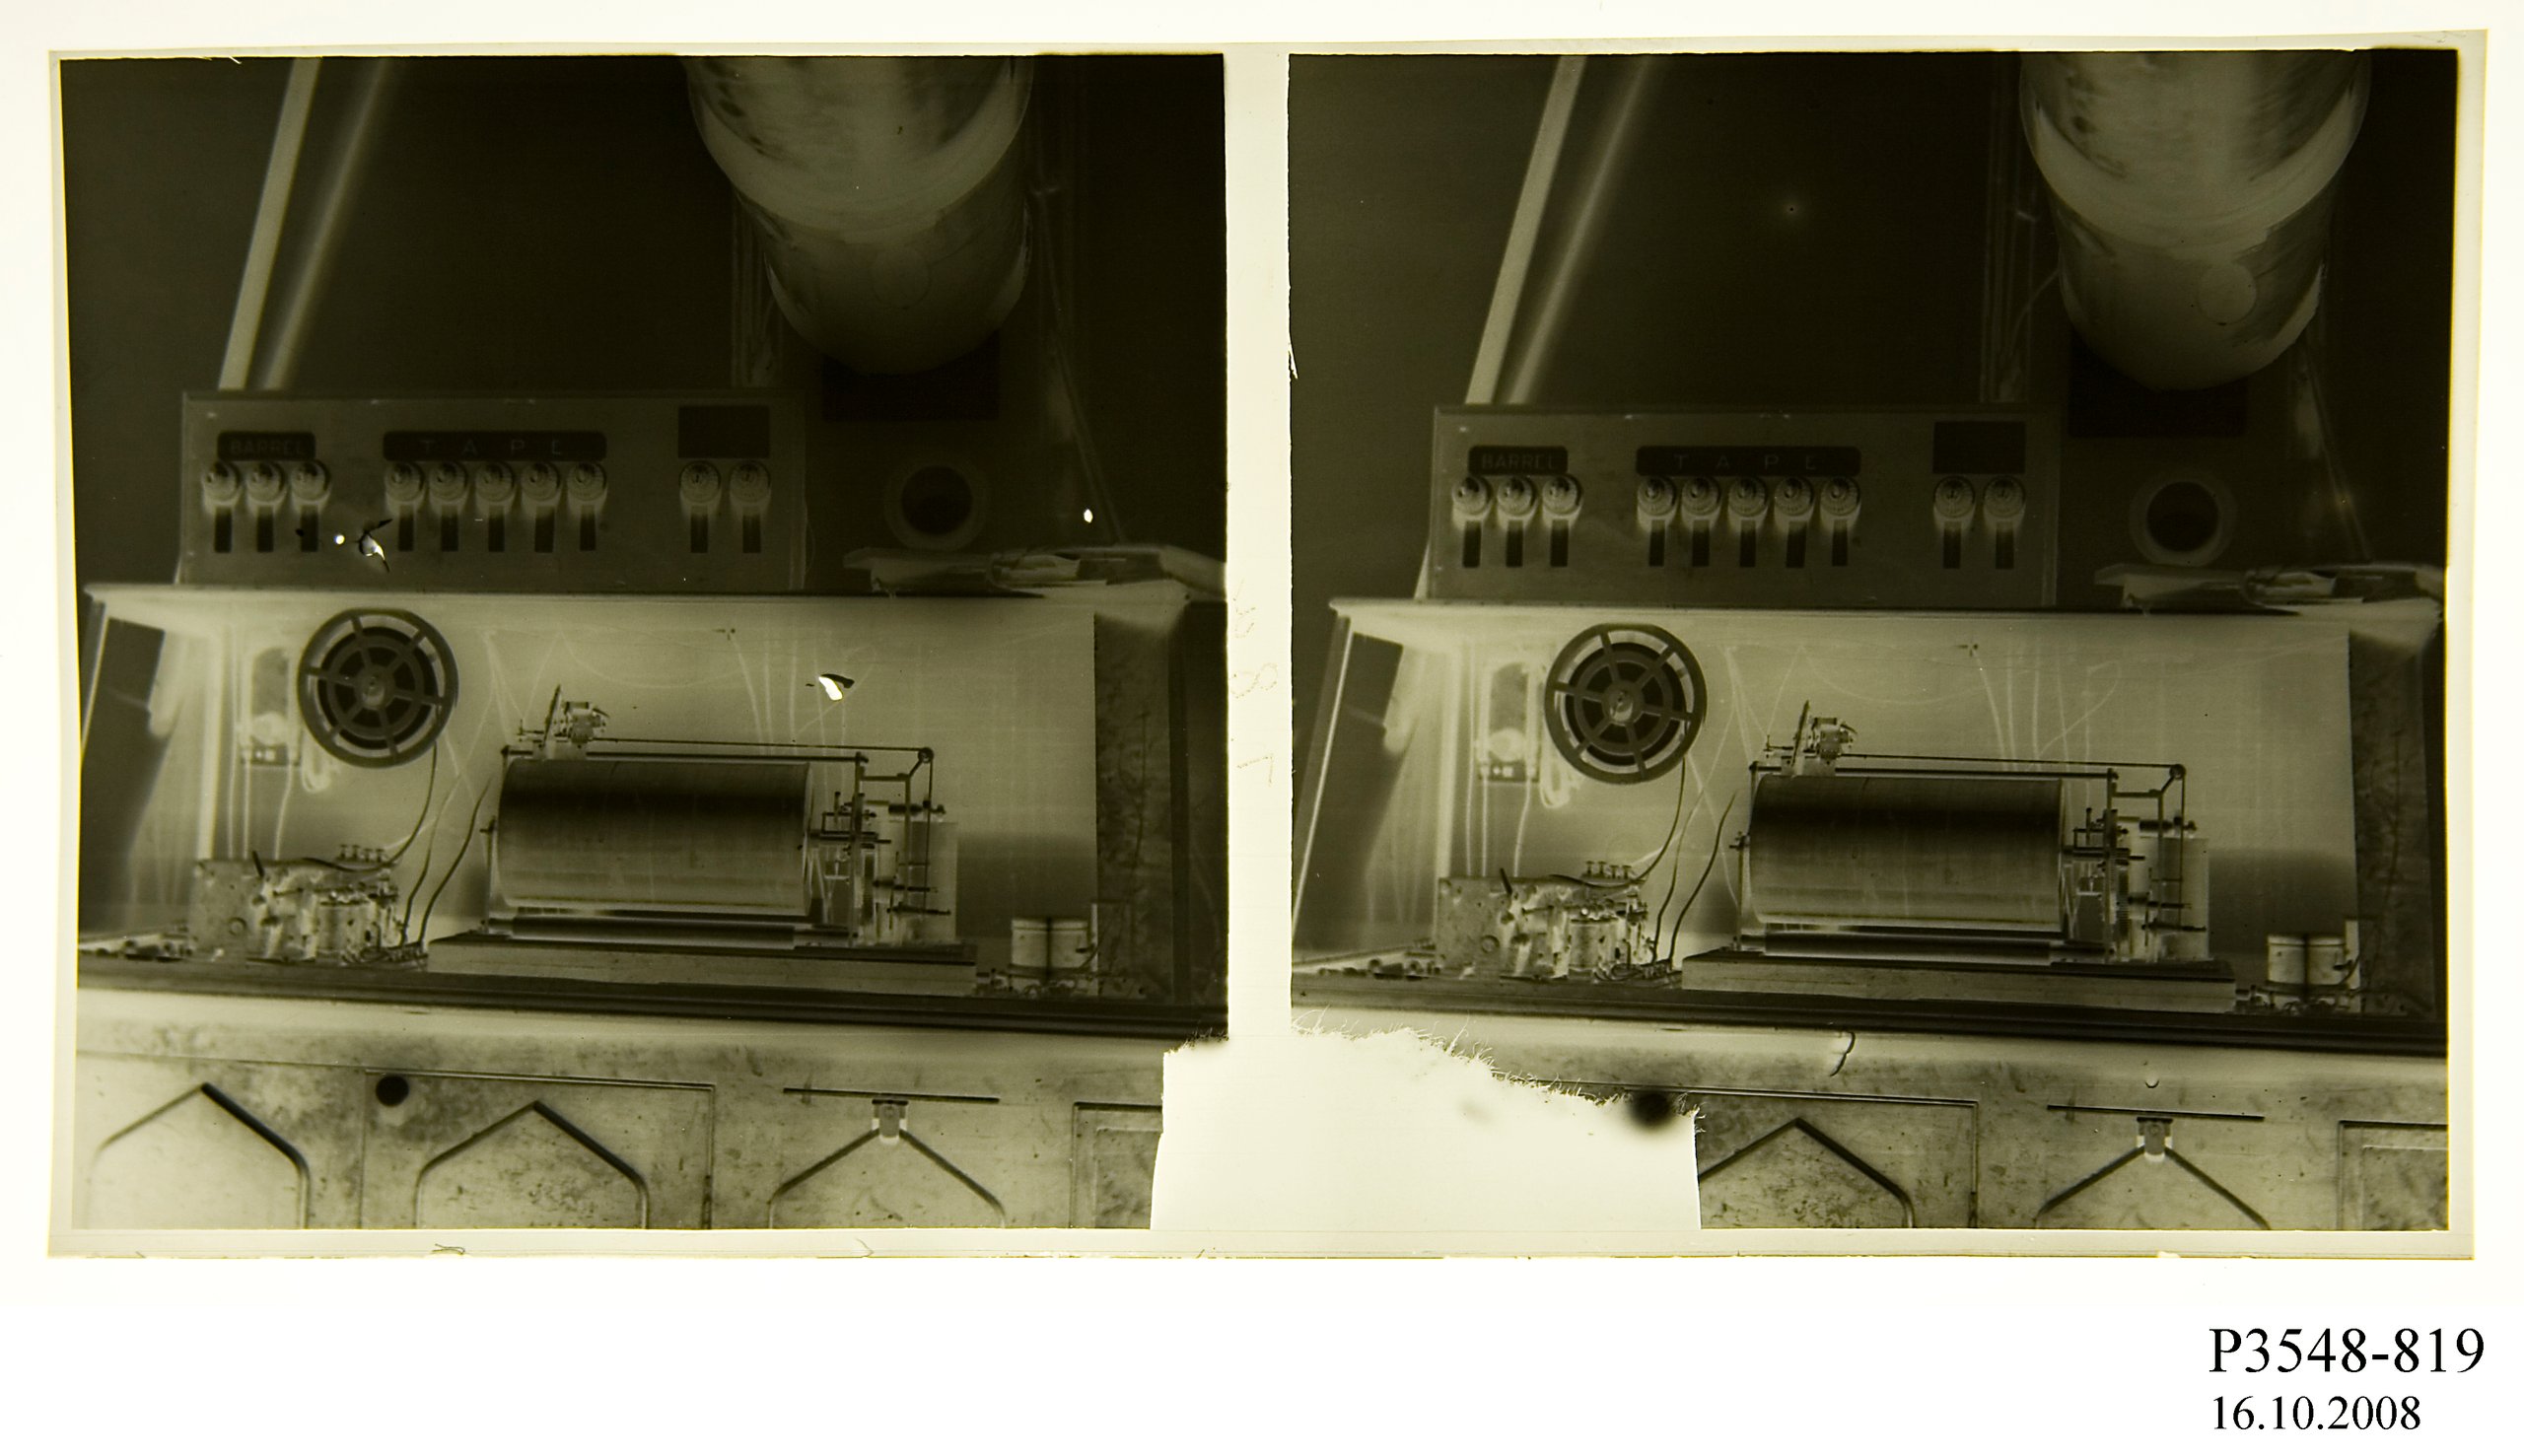 Photographic negative of a sheet paper chronograph